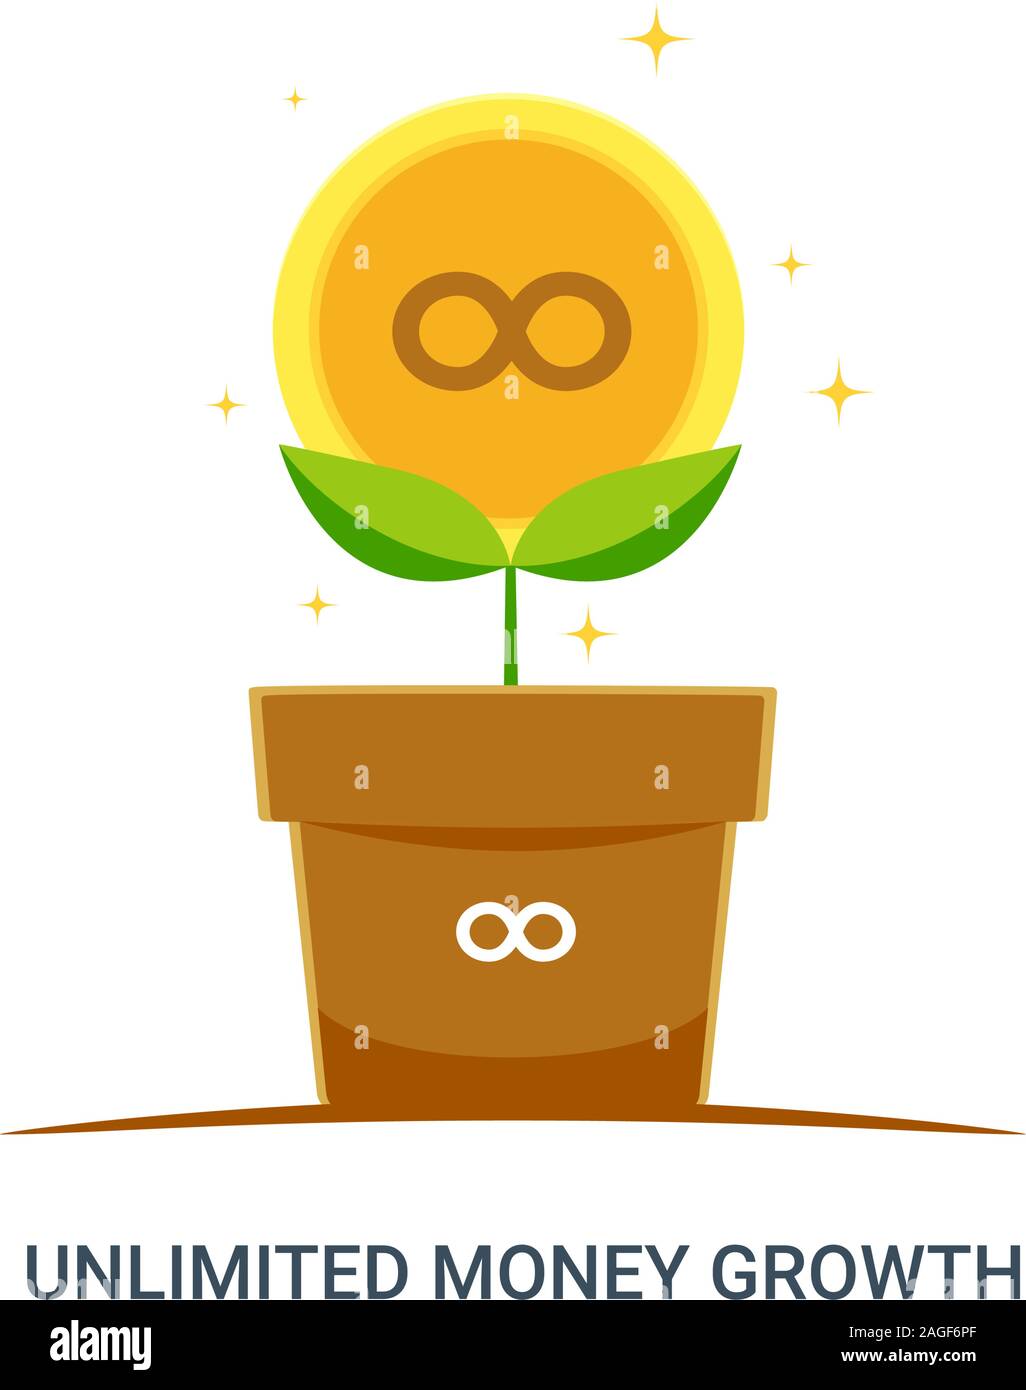 Golden Coin plant inside Pot with Unlimited symbol. Isolated Vector Illustration Stock Vector